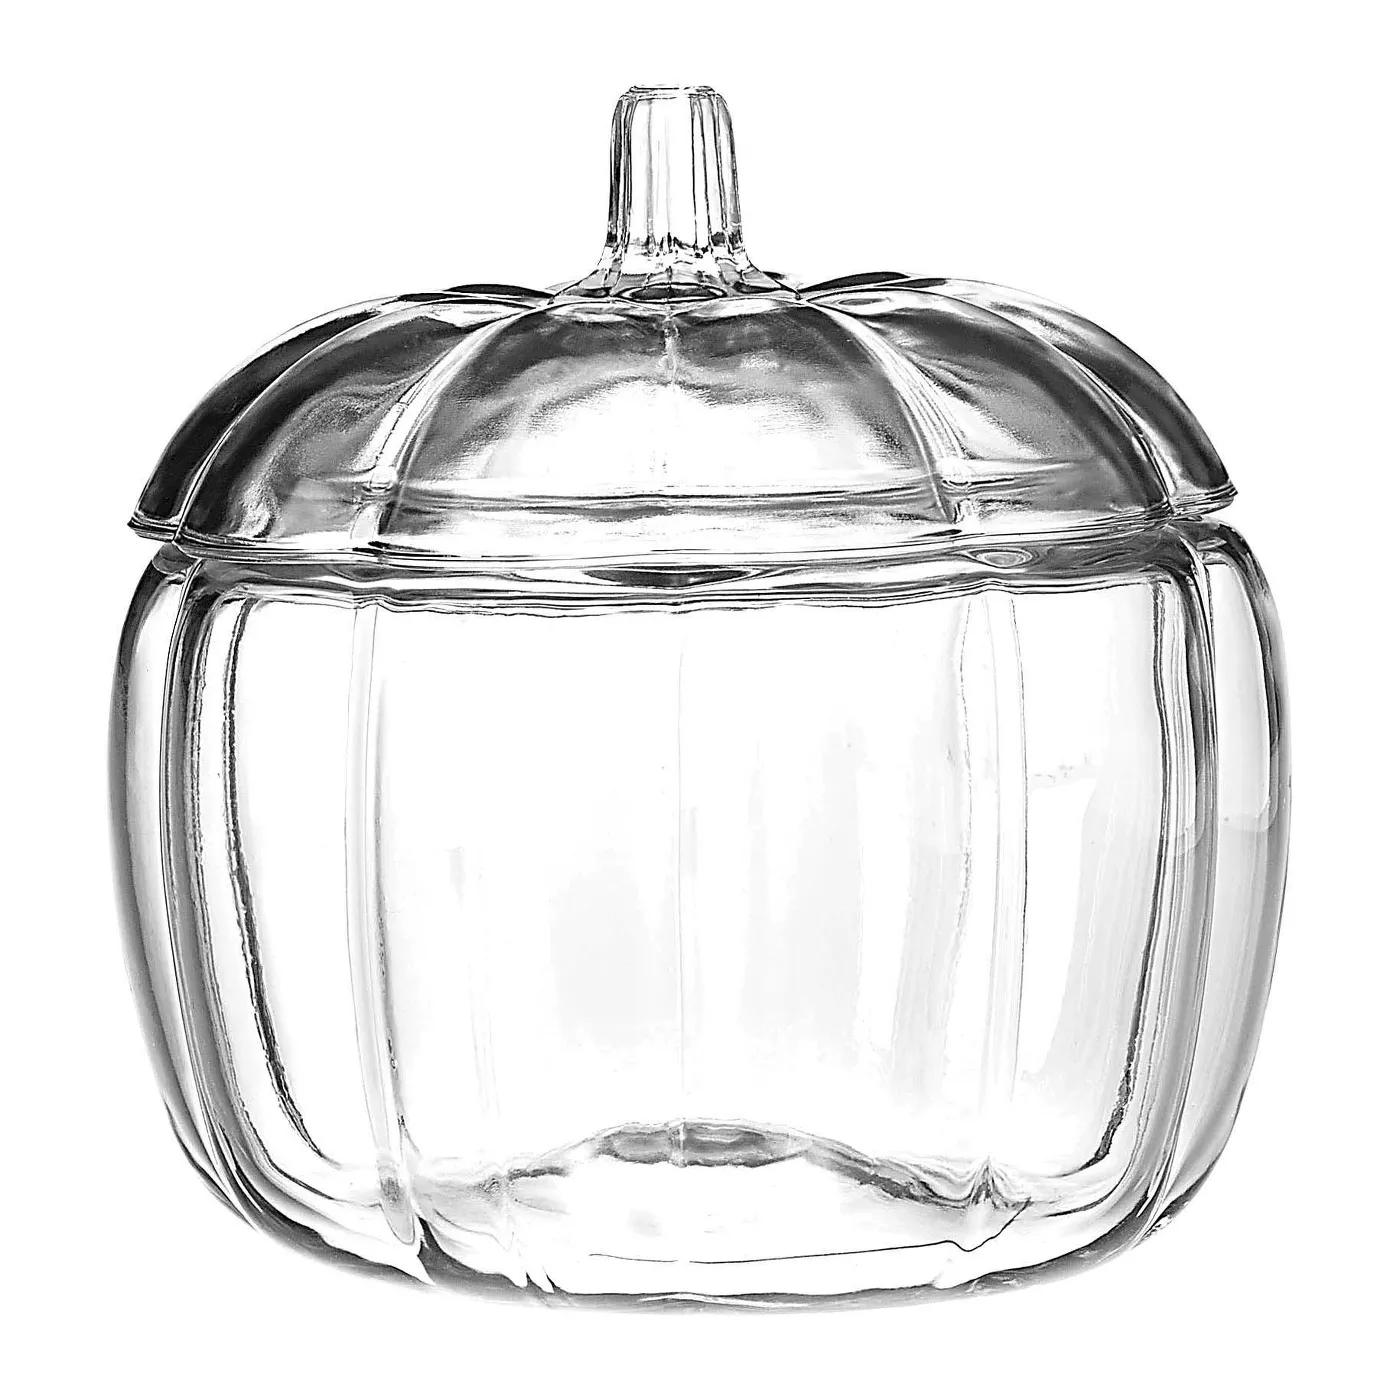 Anchor Hocking 70oz Halloween Pumpkin Decorative Glass Jar (with Lid) - Clear - image 1 of 2